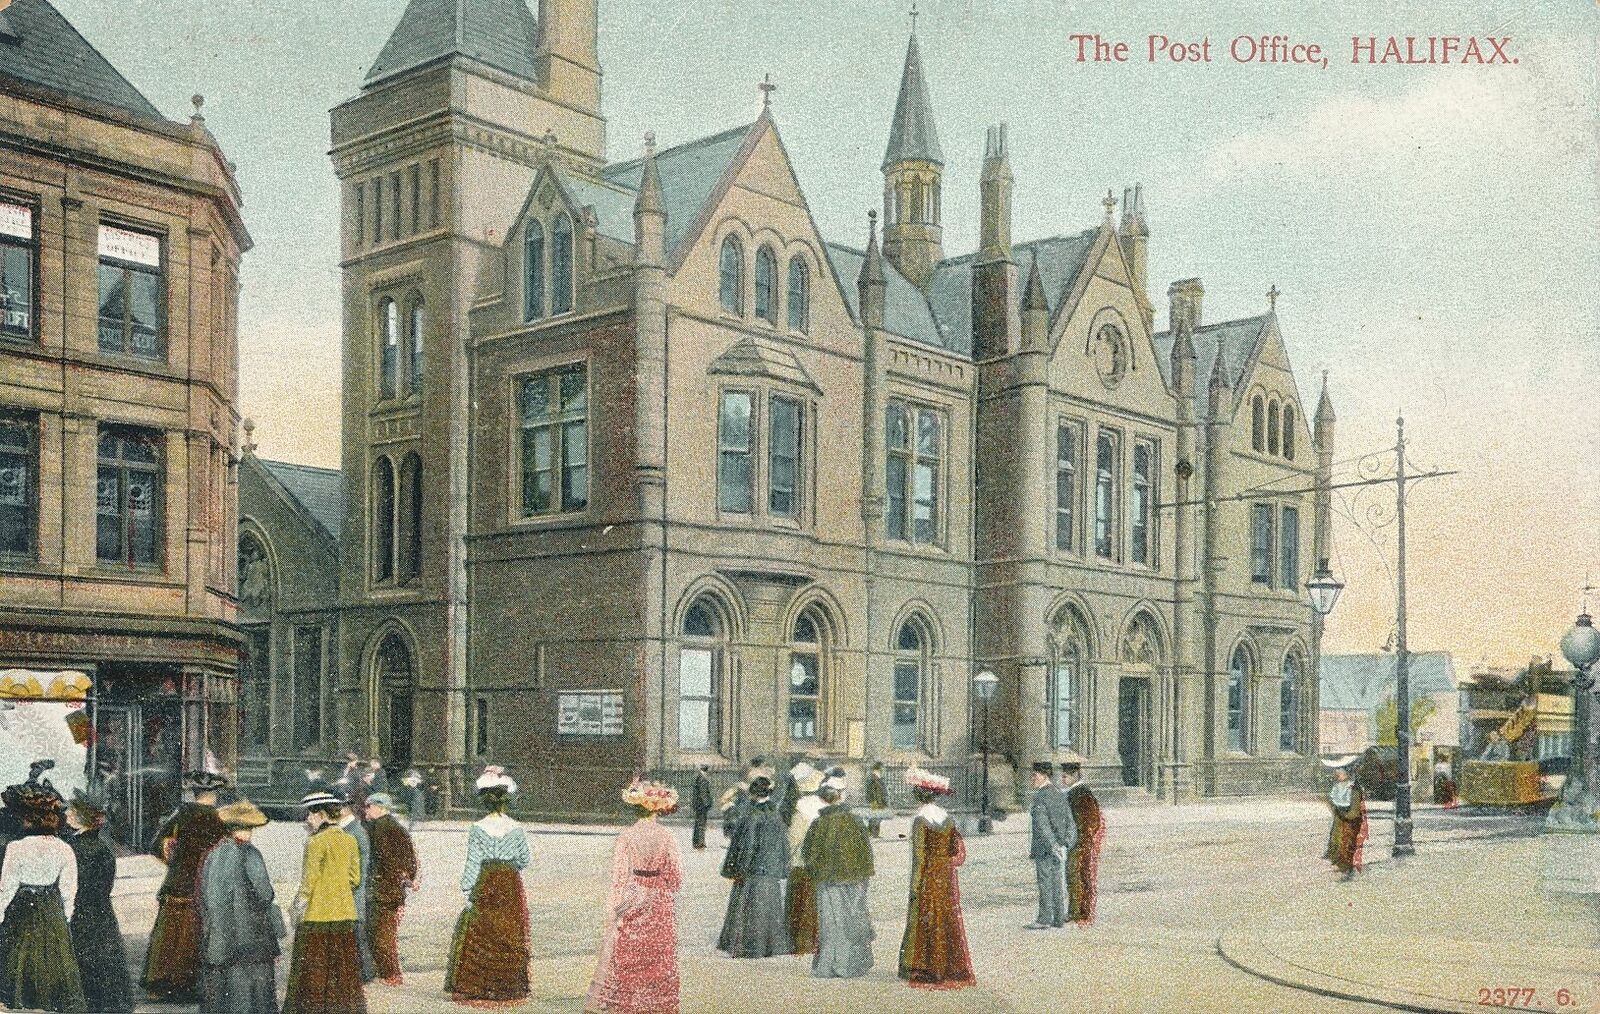 HALIFAX NS - The Post Office